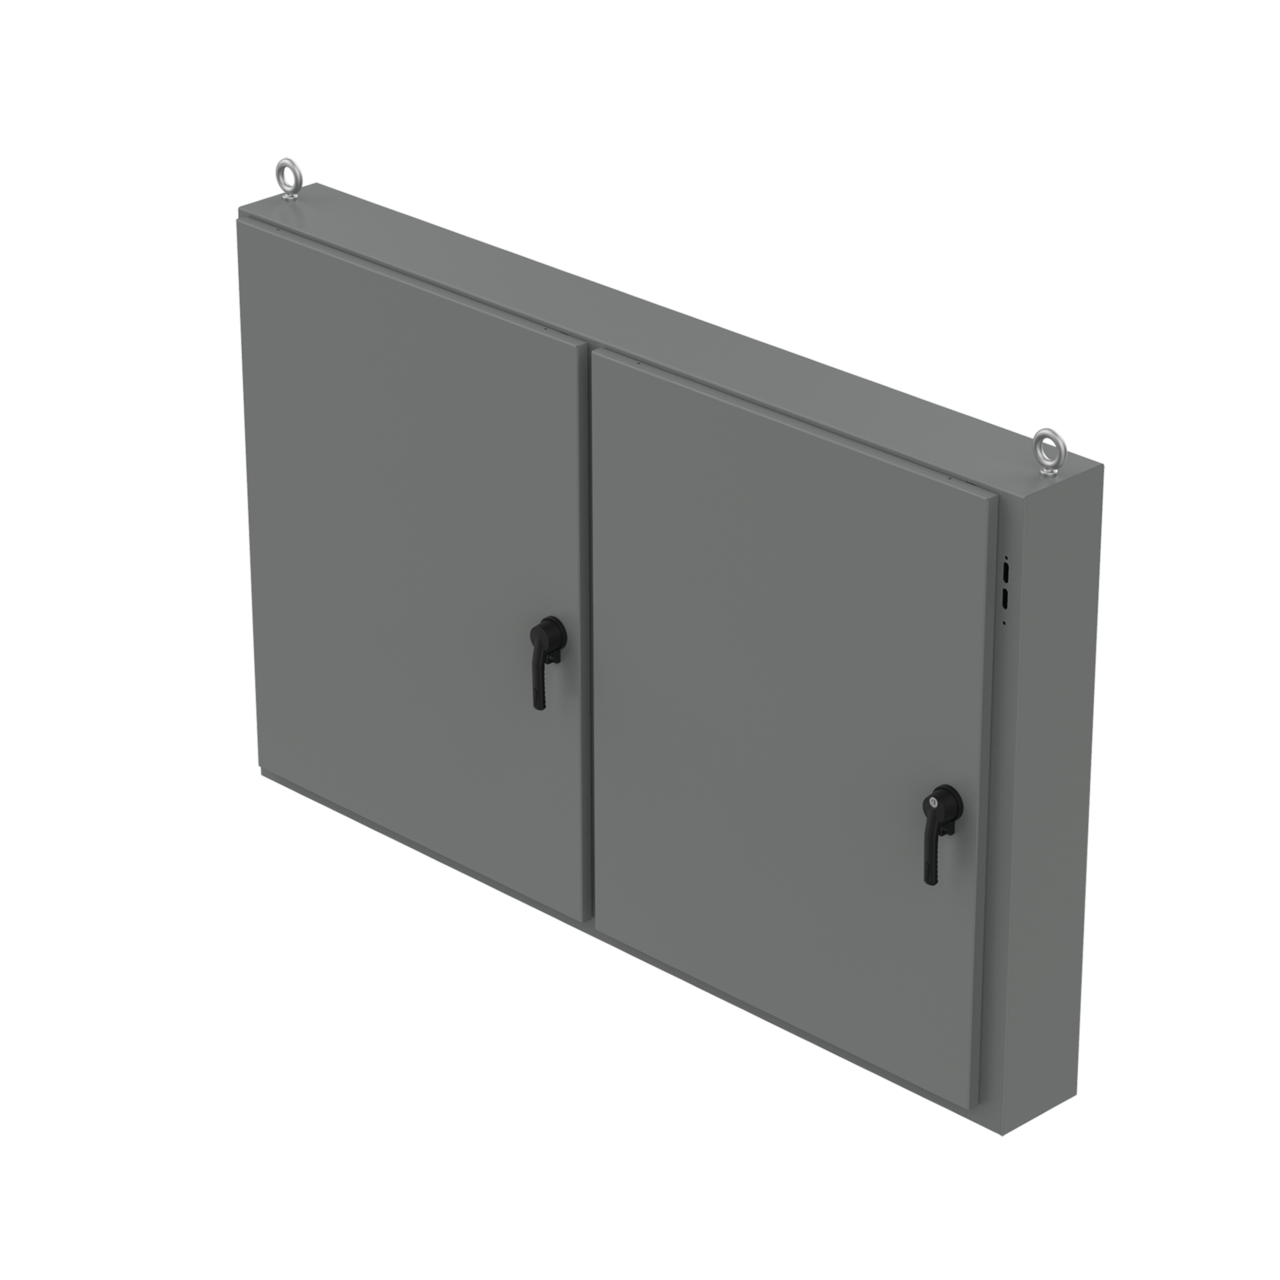 nVent HOFFMAN A60X2E7810 A26M2 2-Door Low Profile Disconnect Enclosure With Handle, 60 in L x 78-1/2 in W x 10 in D, NEMA 12/IP55 NEMA Rating, Steel